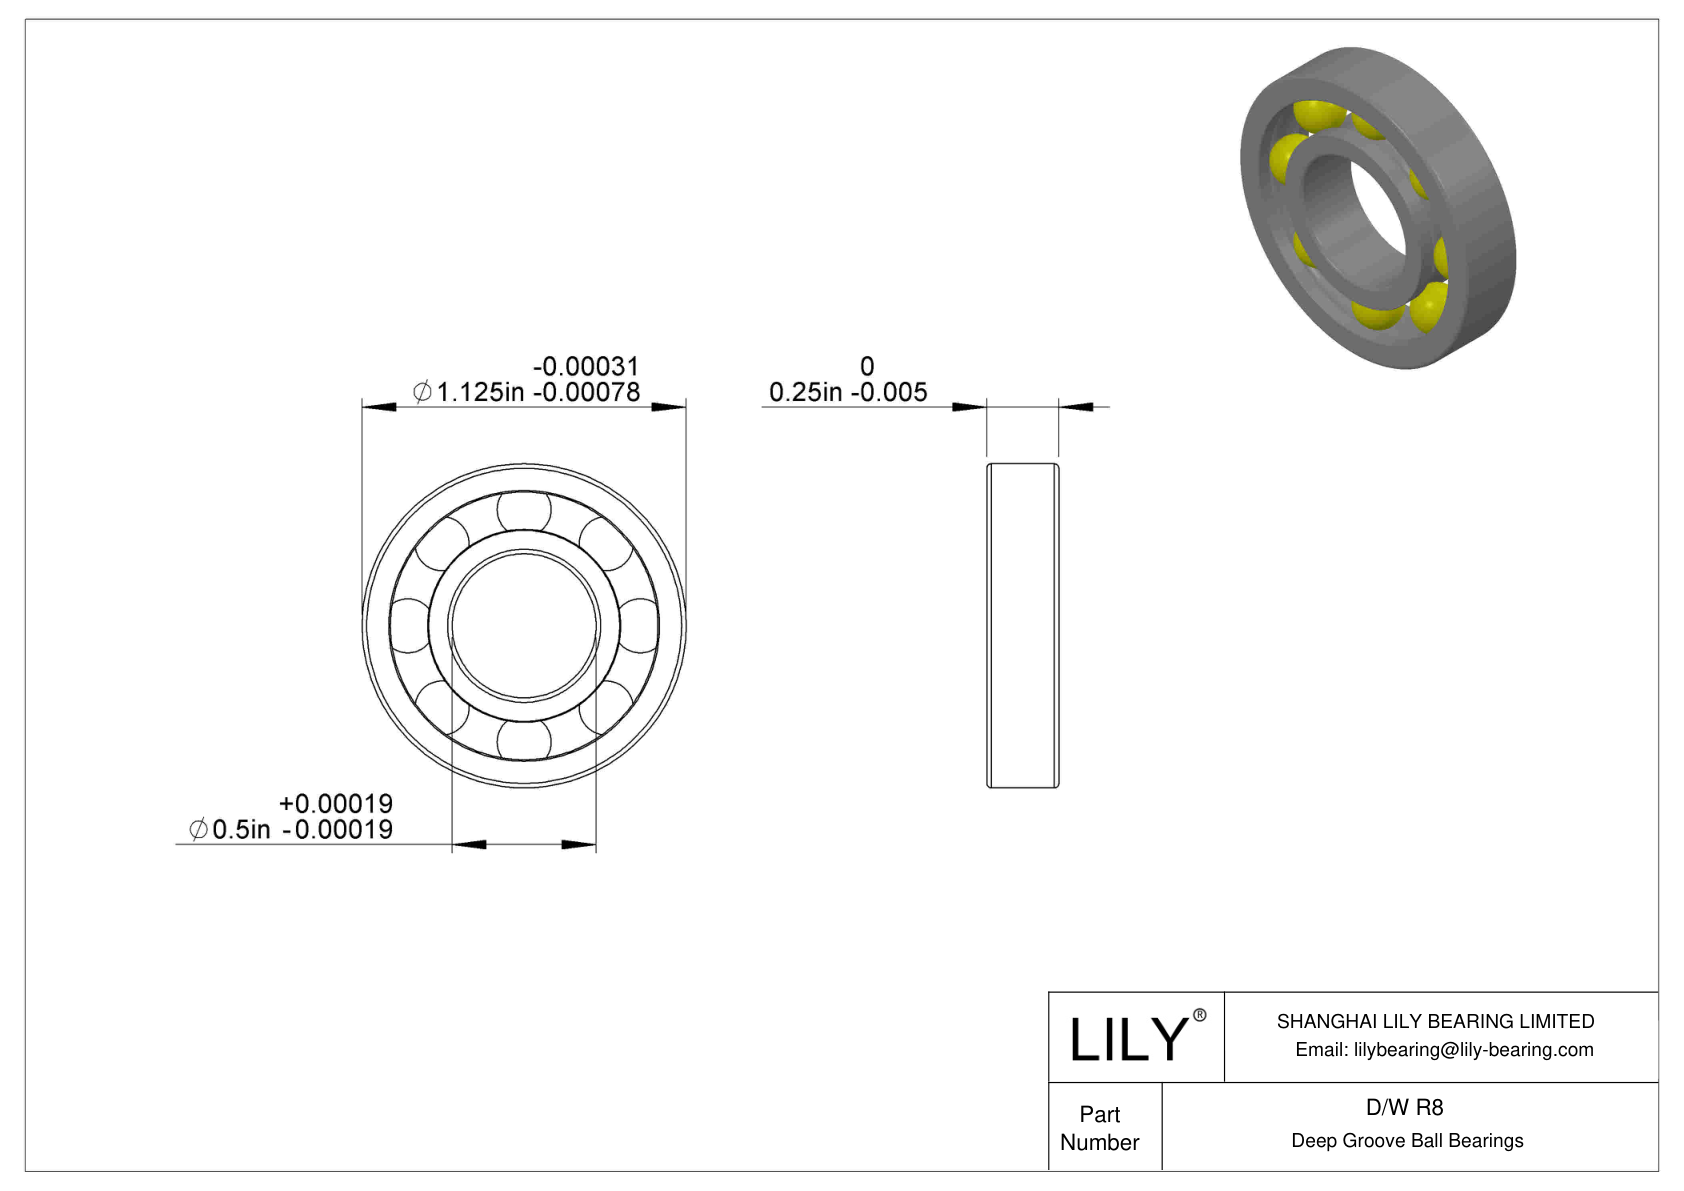 D/W R8 Stainless Steel Deep Groove Ball Bearings cad drawing